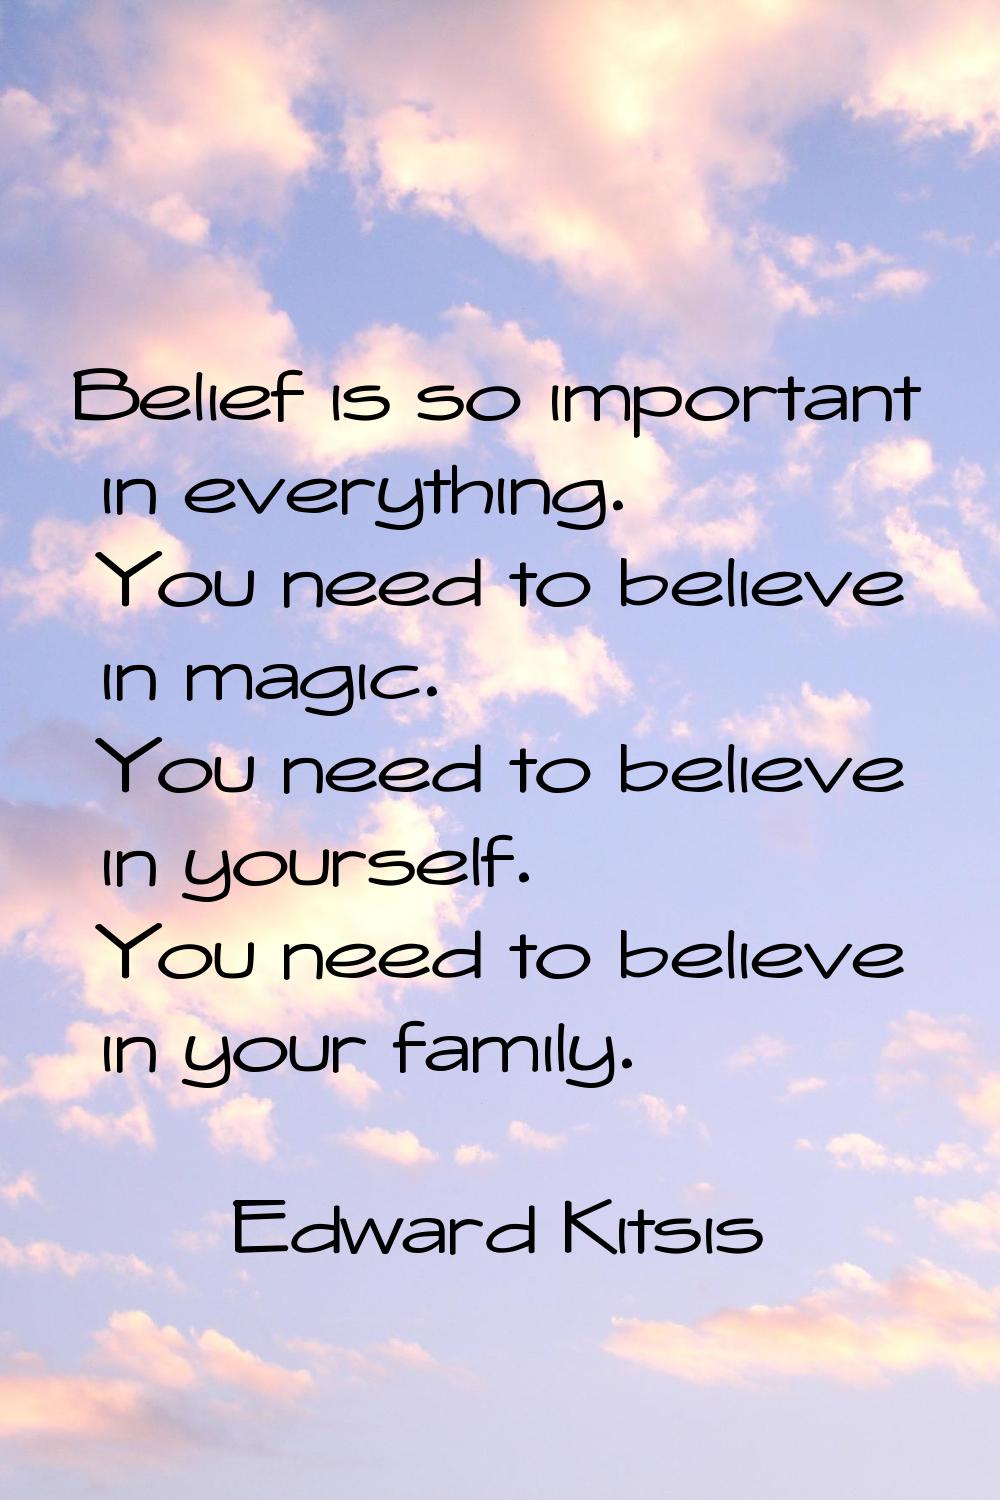 Belief is so important in everything. You need to believe in magic. You need to believe in yourself